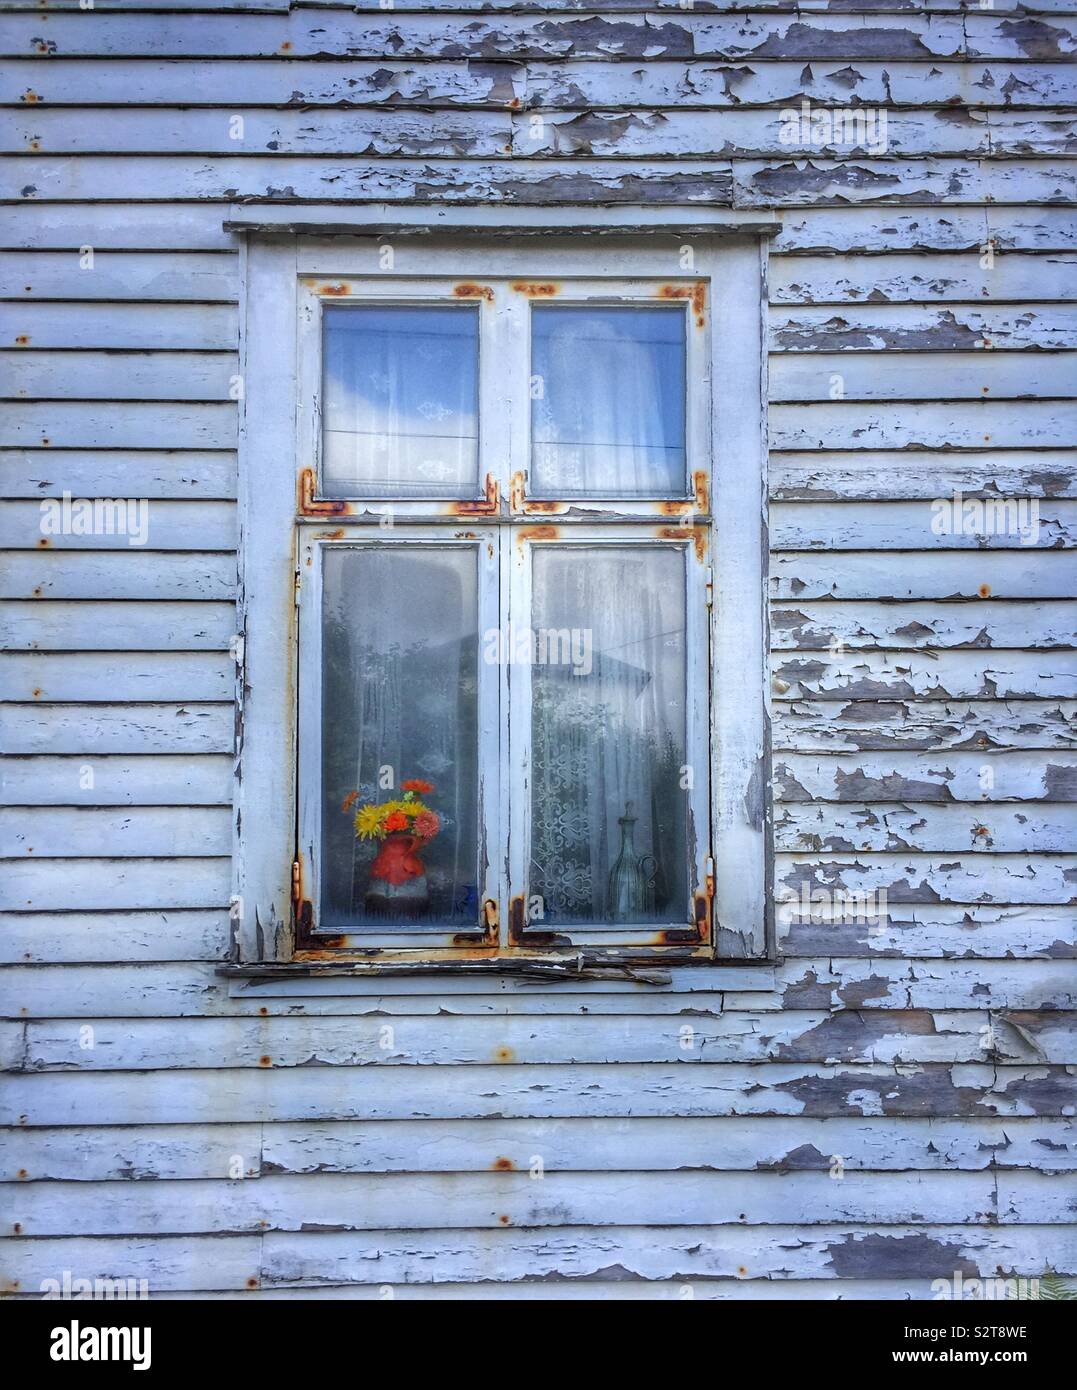 A vase of flowers in the window of an old wooden house Stock Photo